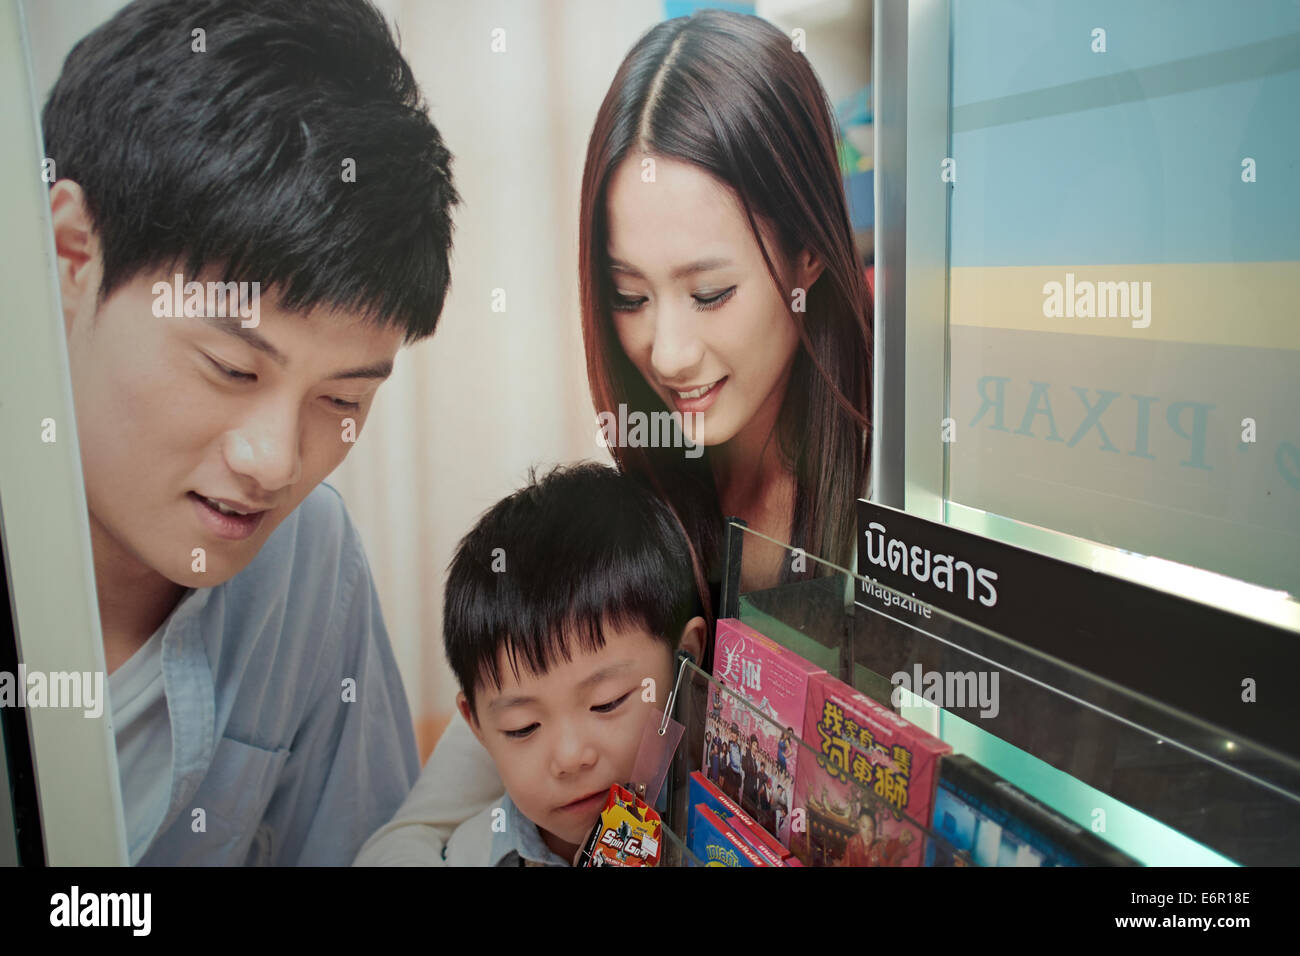 Advertising poster in Bangkok Thailand showing airbrushed faces of woman and boy Stock Photo